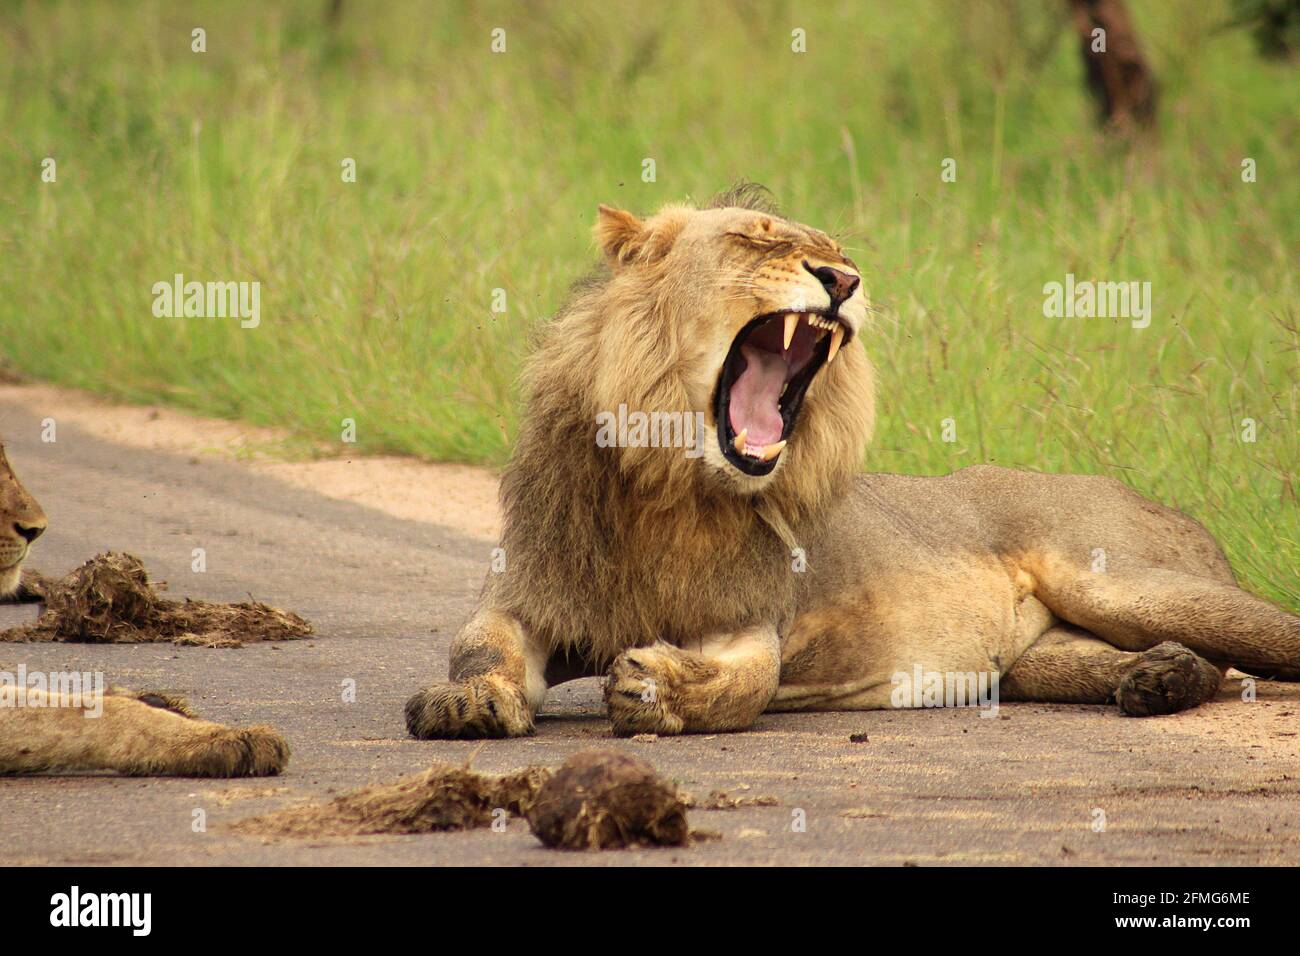 South African Big Five Lion (Panthera leo) yawning juvenile on the road in Kruger National Park, Limpopo Province, South Africa Stock Photo